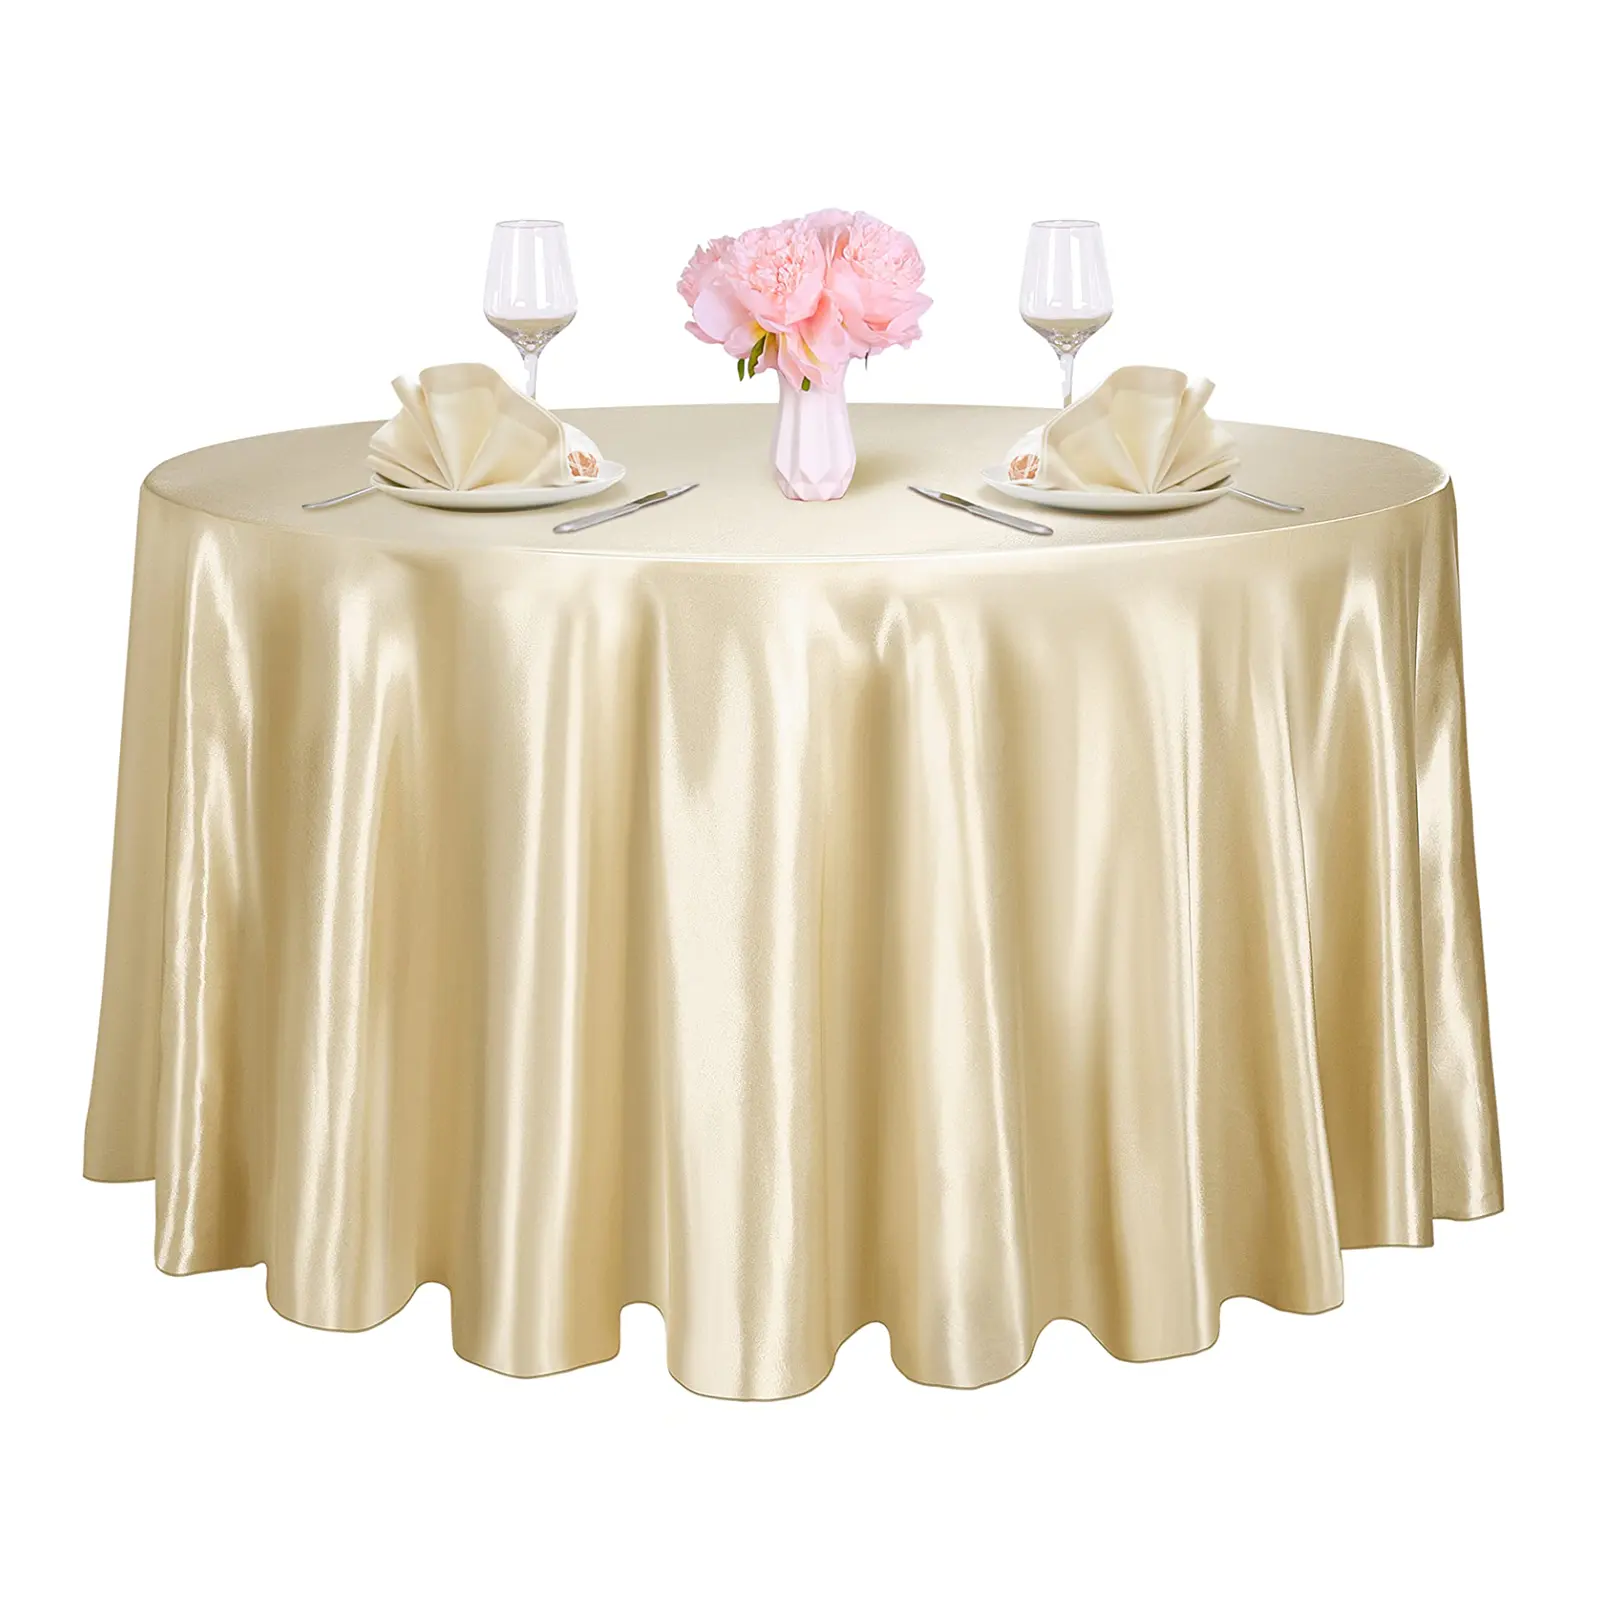 305cm/120inch Hot Selling Champagne Round Tablecloth Satin Table Cloth For Glamorous Wedding Party Celebrations